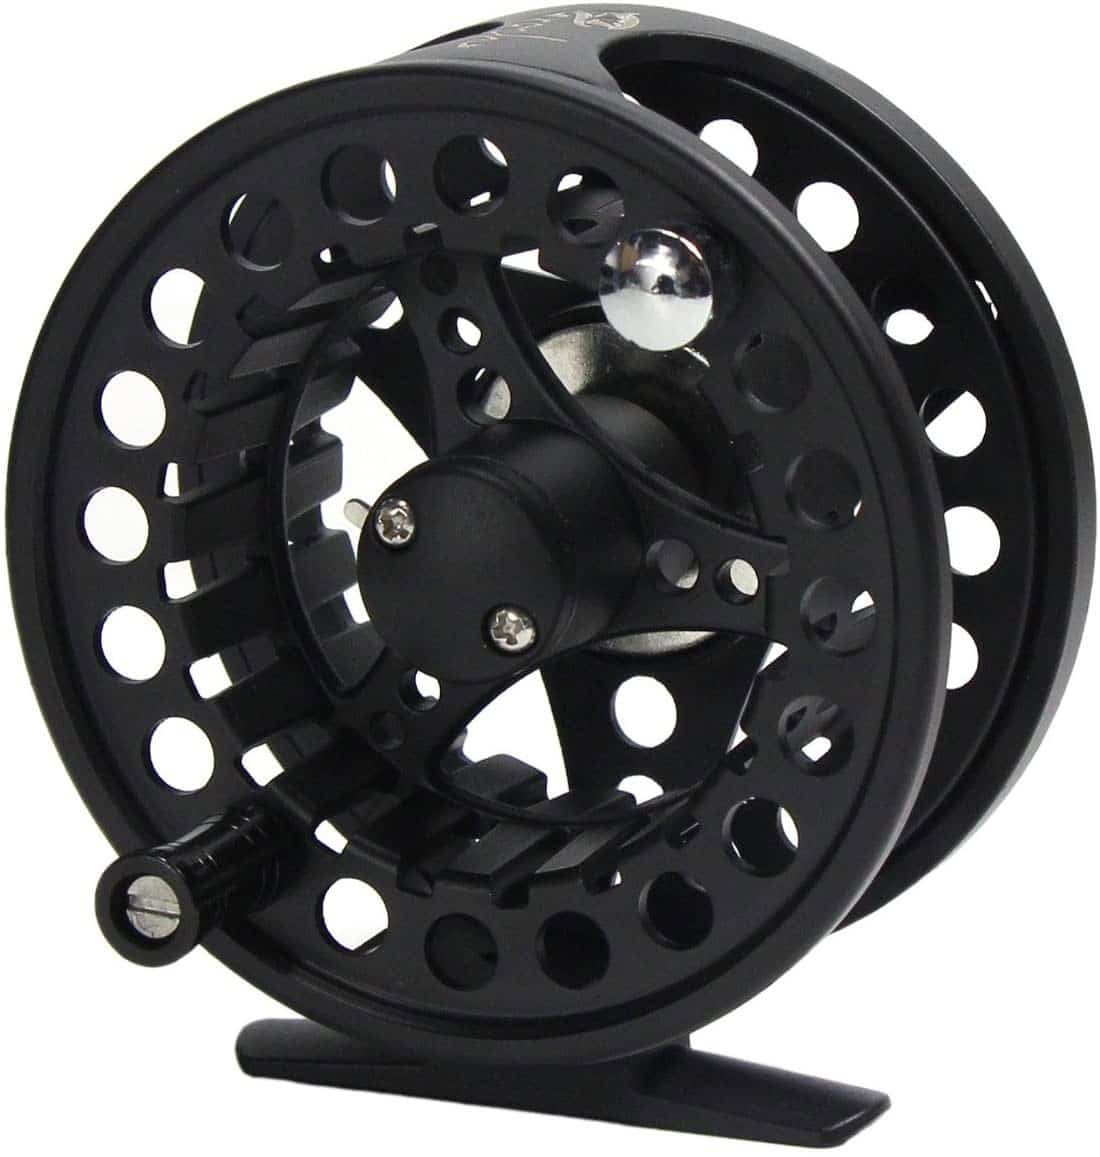 Croch Fly Fishing Reel with Aluminum Alloy Body